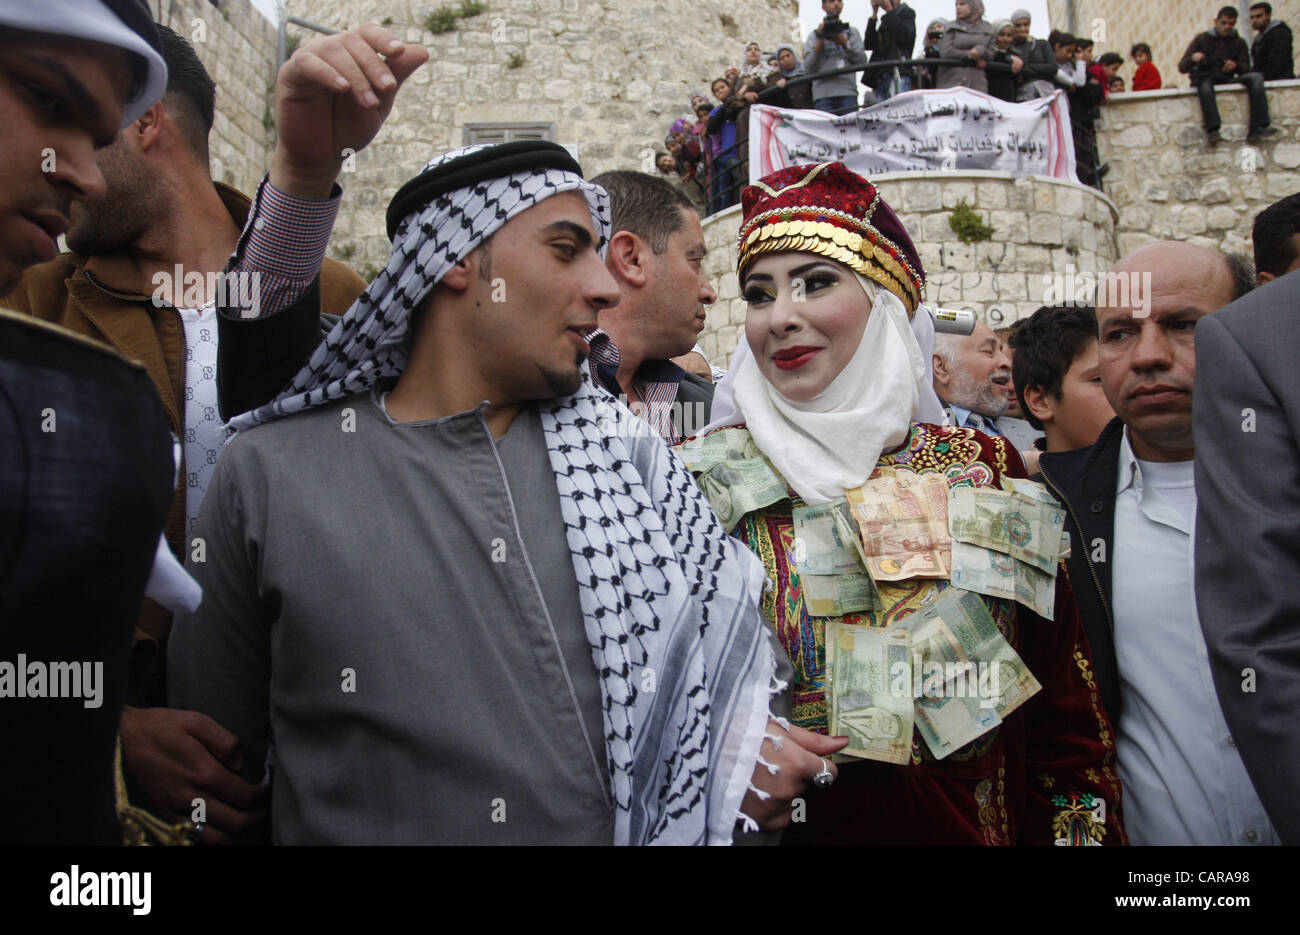 April 12, 2012 - Nablus, West Bank, Palestinian Territory - The Palestinian bride and groom Mhaha Salam (R) and Thayer Qasem (L), walk down the street on their wedding day on April 12, 2012  Stock Photo